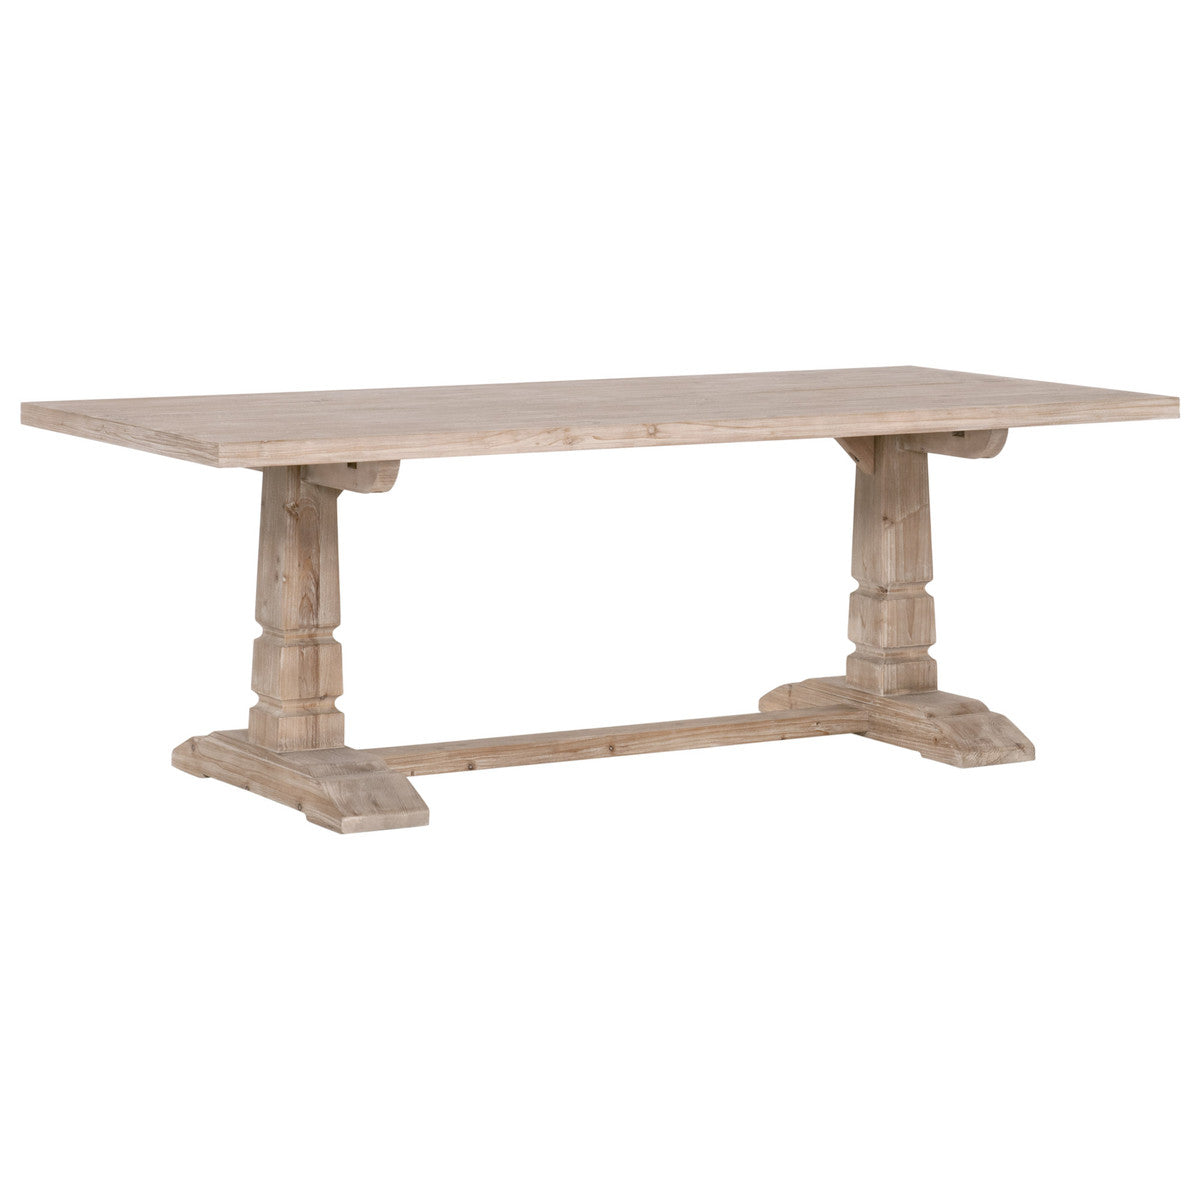 Hayes Extension Dining Table in Smoke Gray Pine - 8013.SGRY-PNE